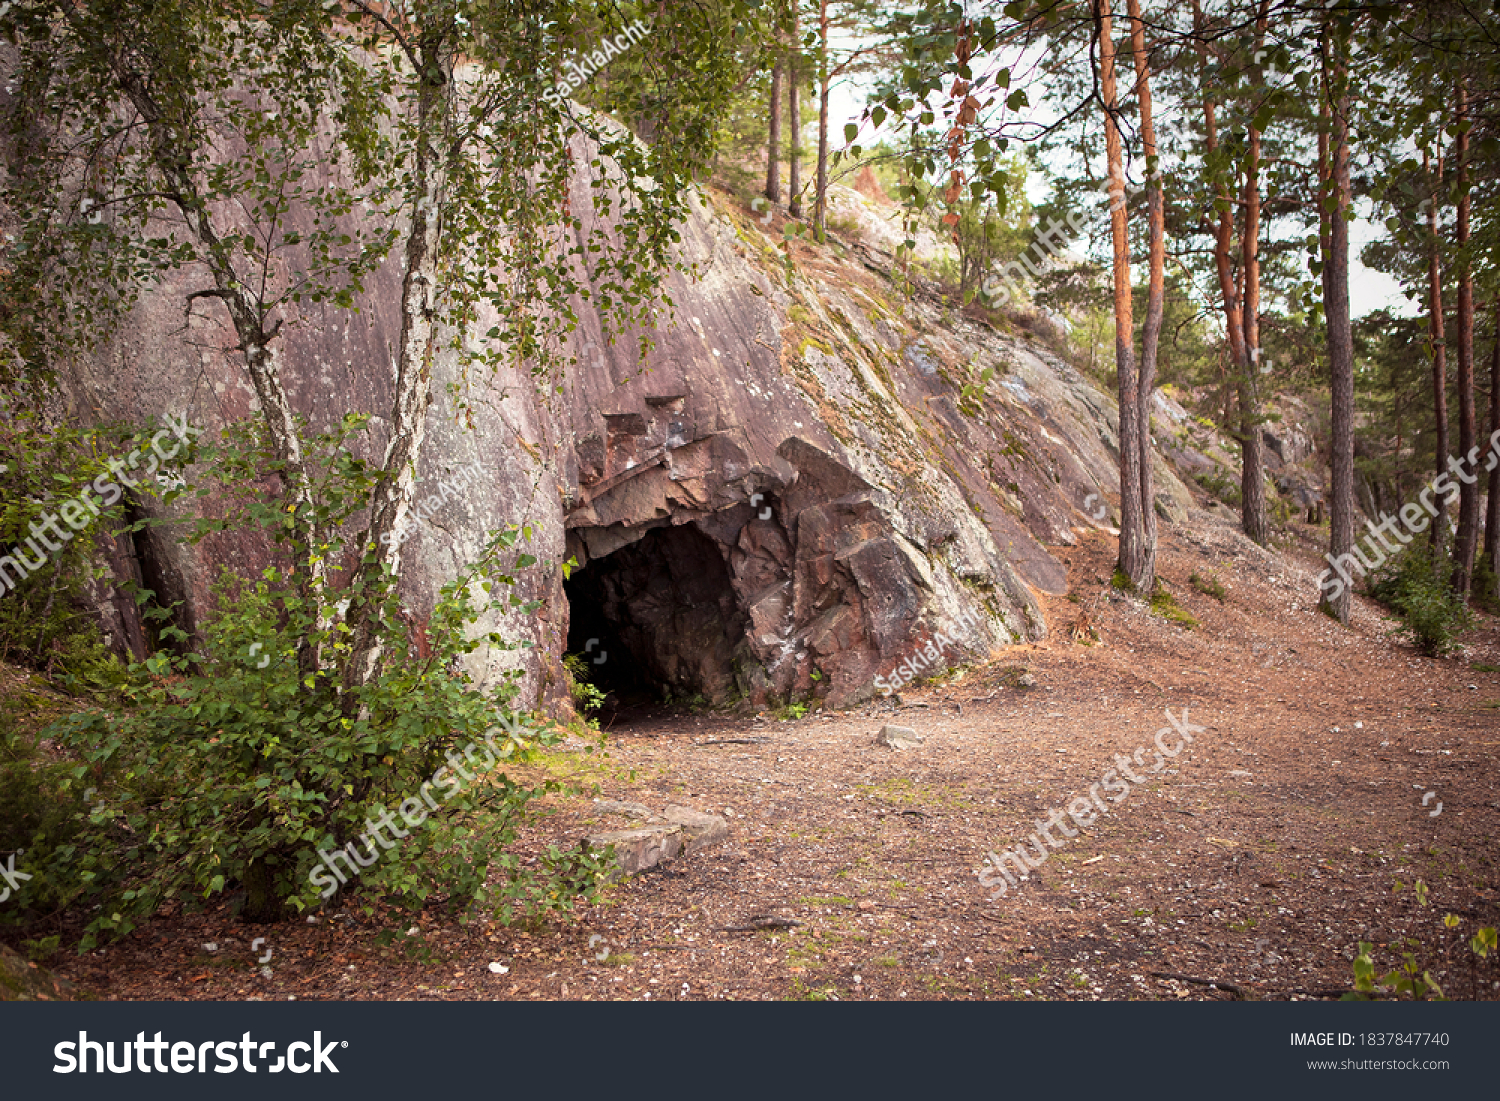 Landscape with cave and forest. Scenic entrance to cave. Rock wall with a dark hole. Spro, Mineral historic mine. Nesodden Norway. Nesoddtangen peninsula. #1837847740